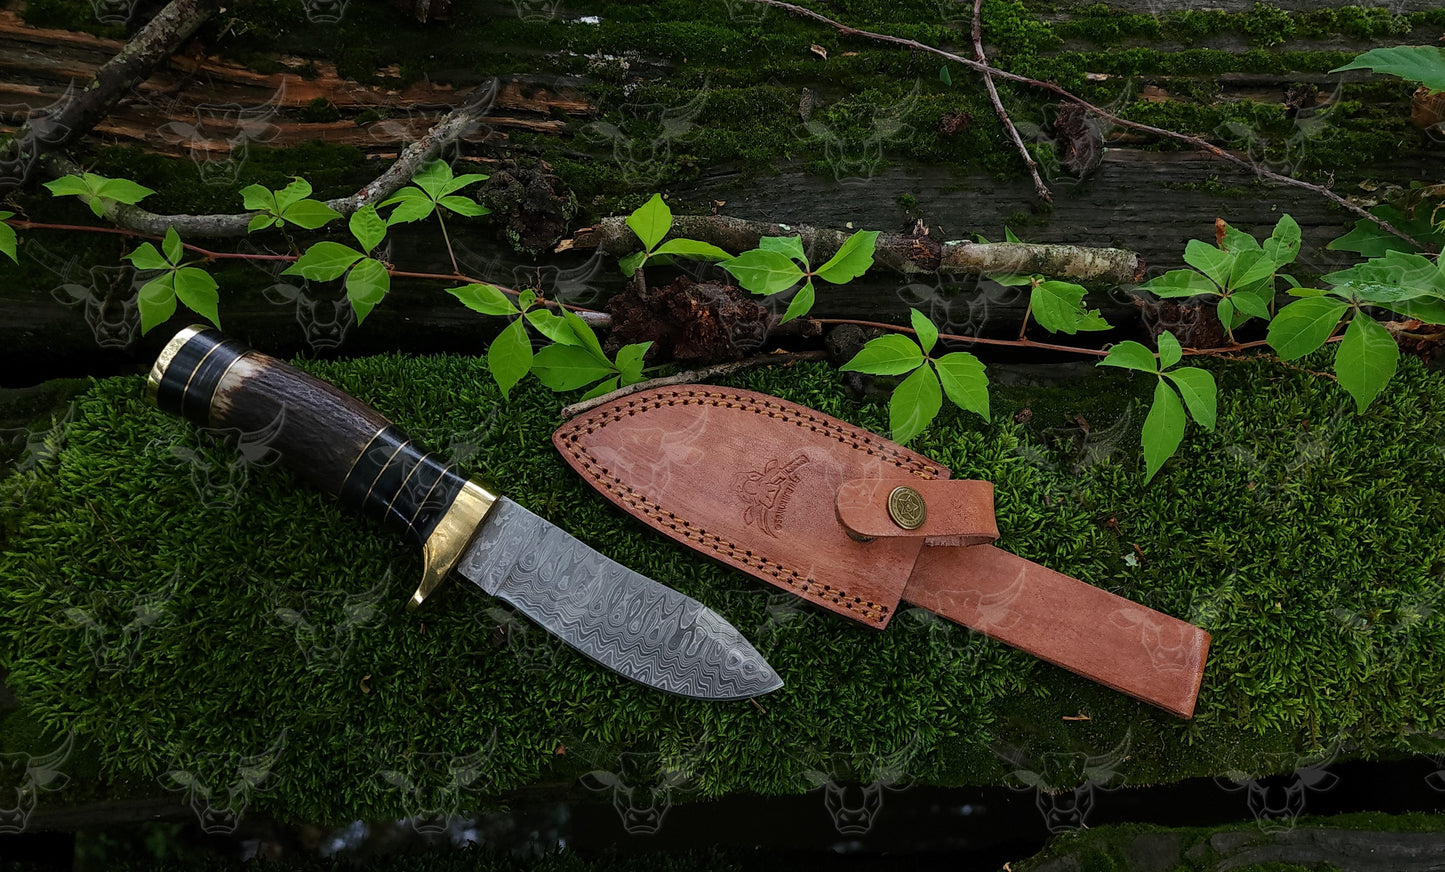 EBK-10 Damascus steel knife, Stag handle, Fixed blade knife